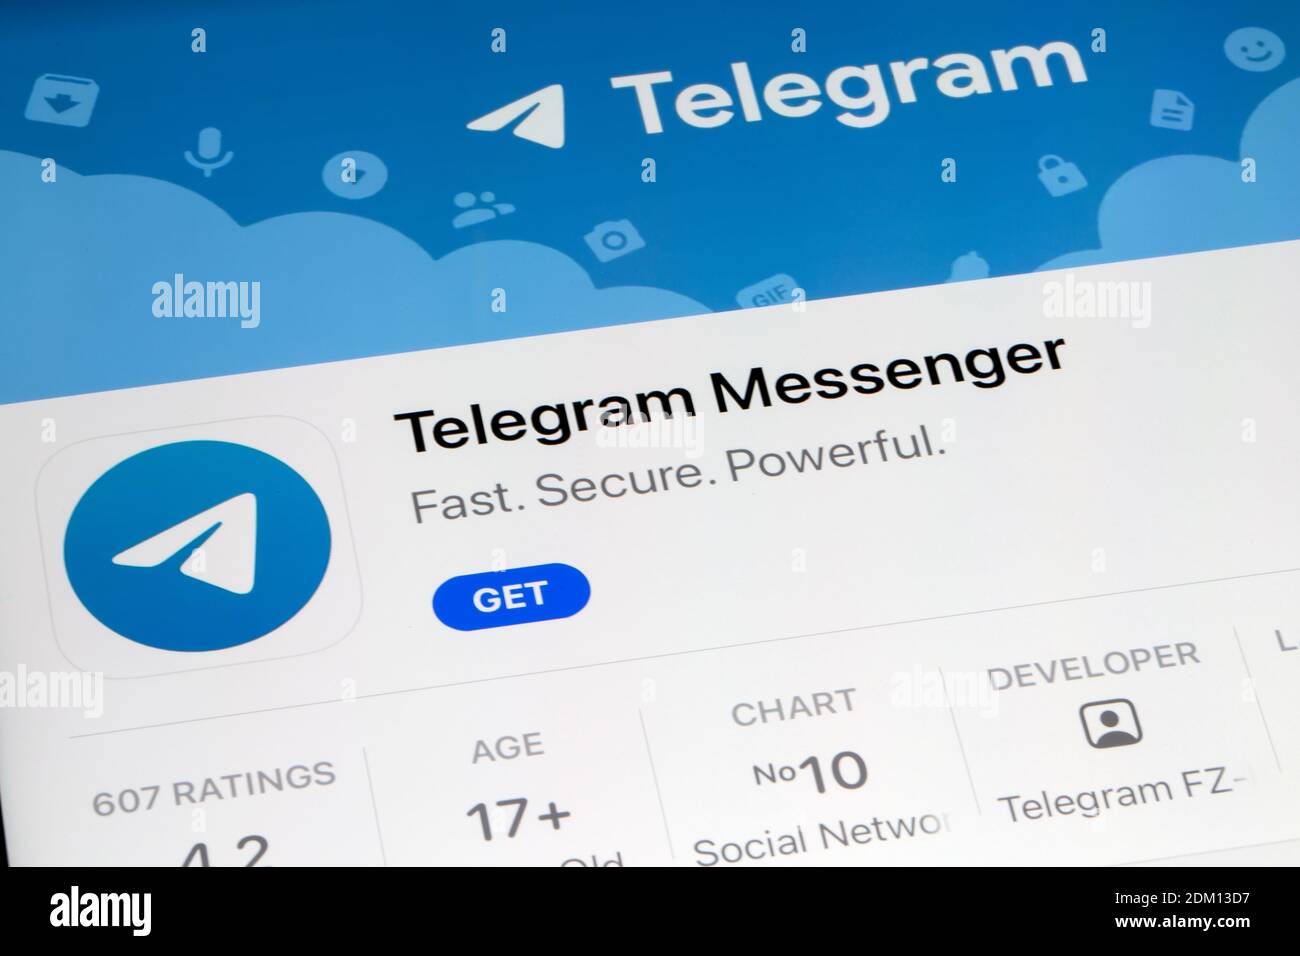 Ostersund, Sweden - August 2, 2020: Telegram Messenger app. Telegram is a cloud-based instant messaging, videotelephony and voice over IP service. Stockfoto